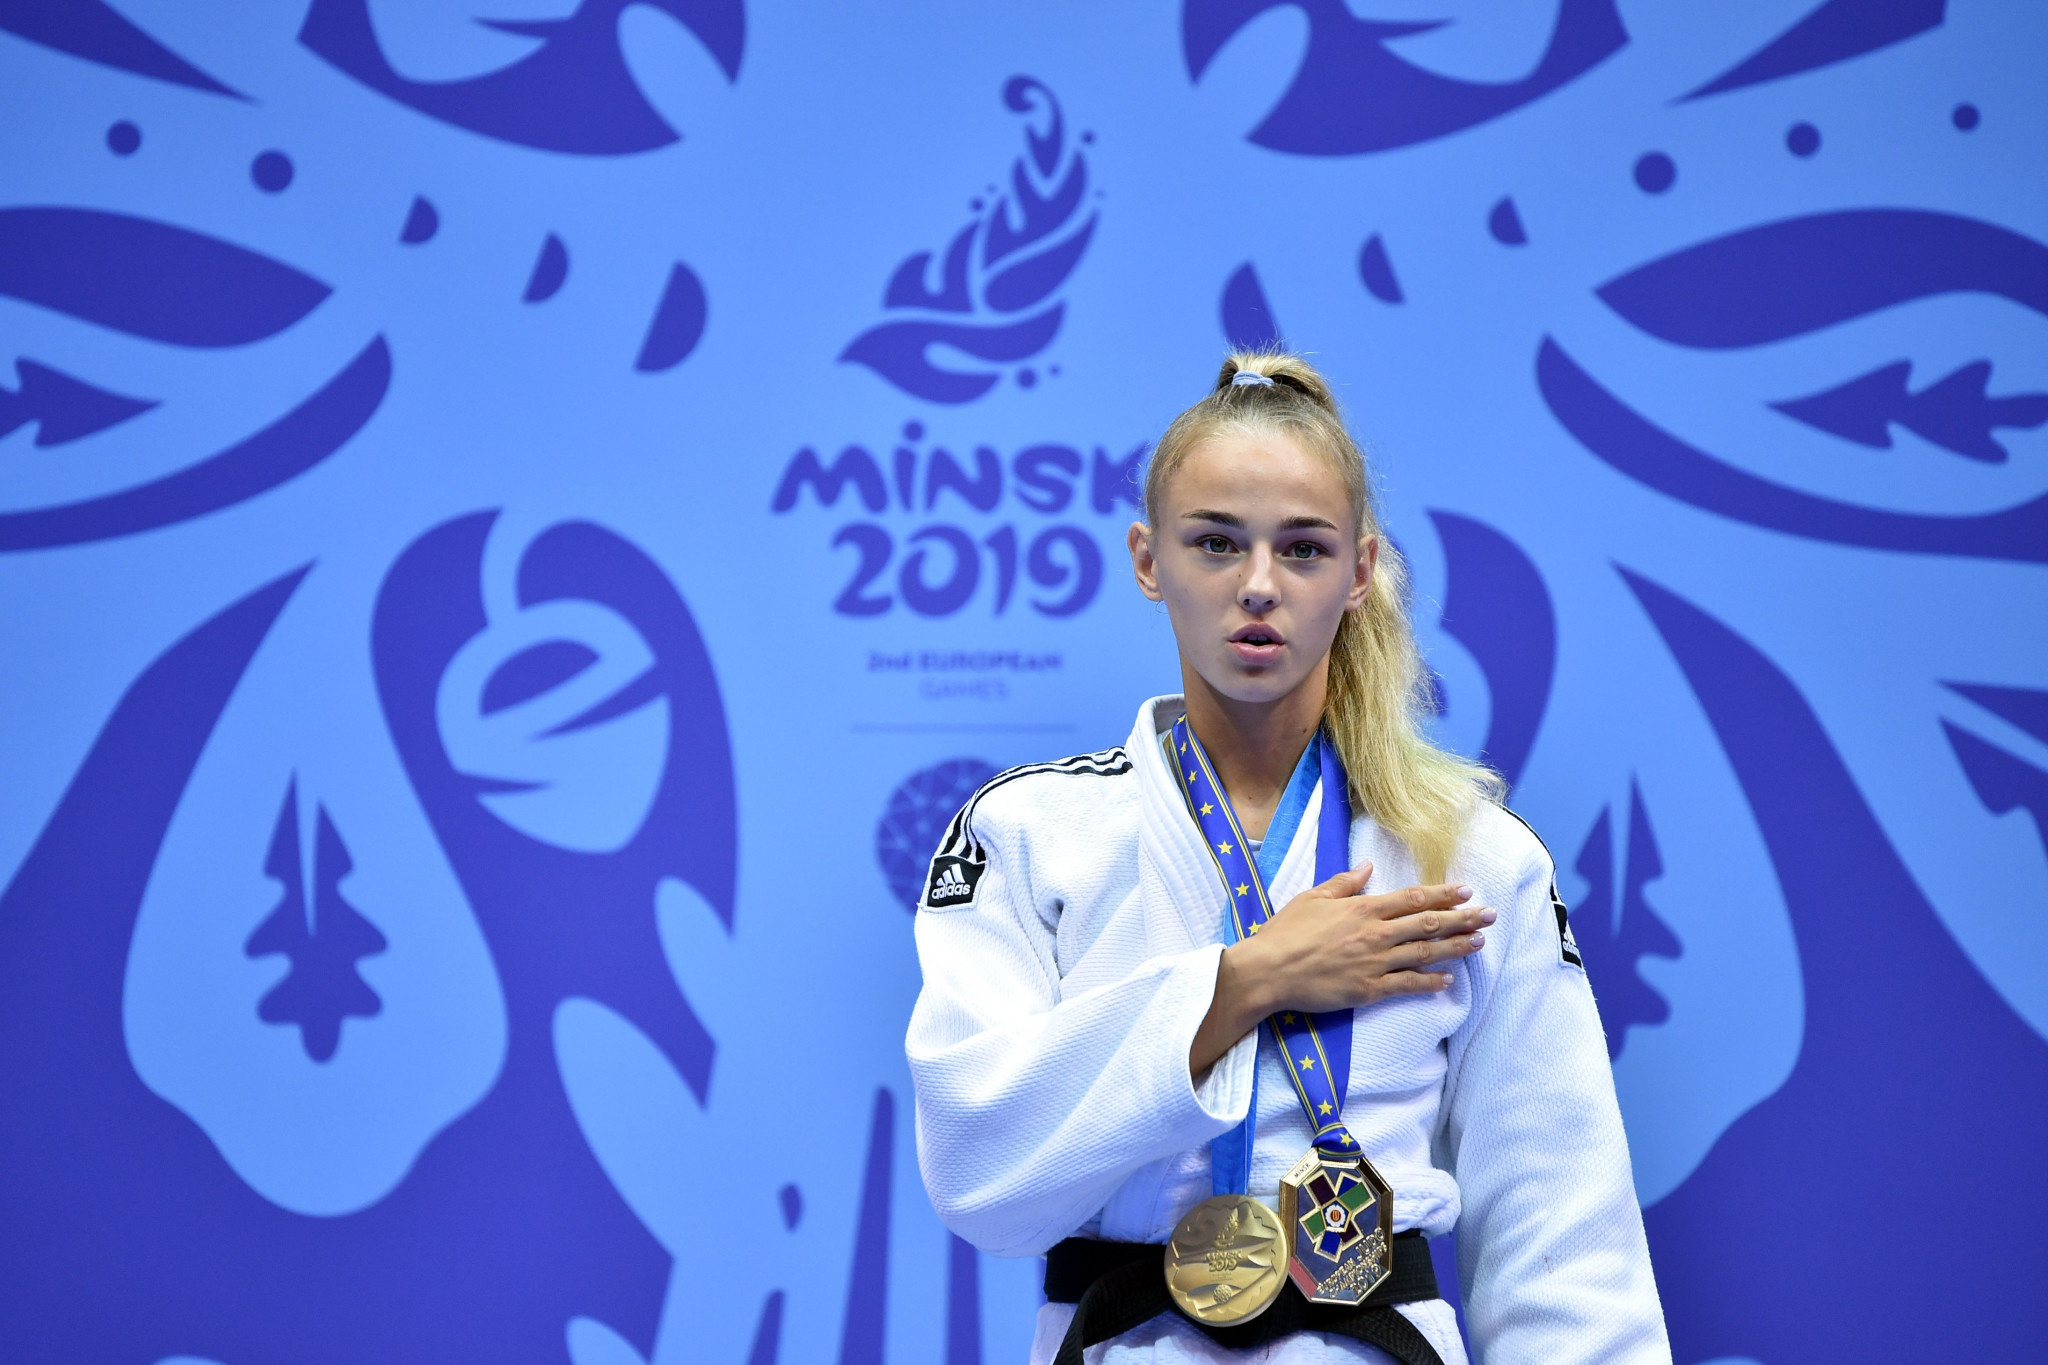 Ukraine's 18-year-old world judo champion Daria Bilodid celebrates another major gold in Minsk today ©Getty Images